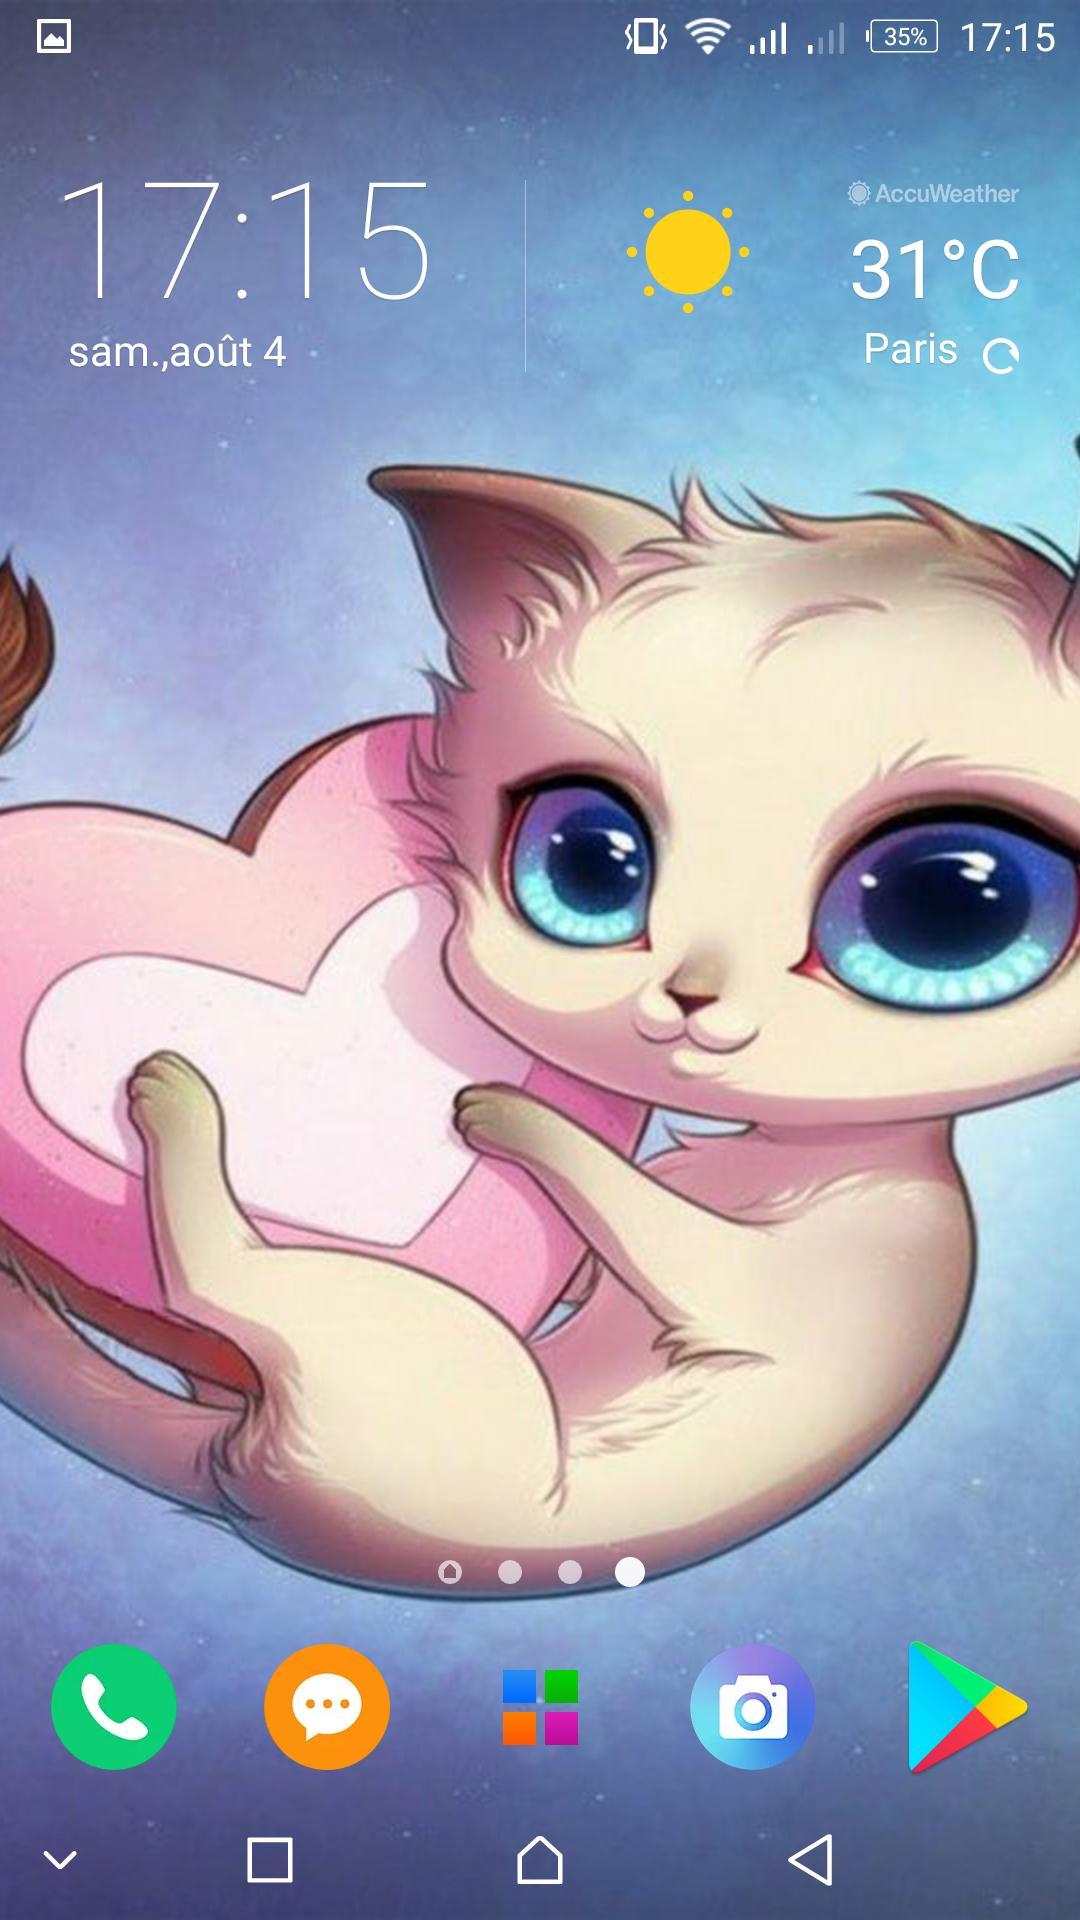 1080 x 1920 · jpeg - Kawaii Cats Wallpapers - Cute Backgrounds for Android - APK Download